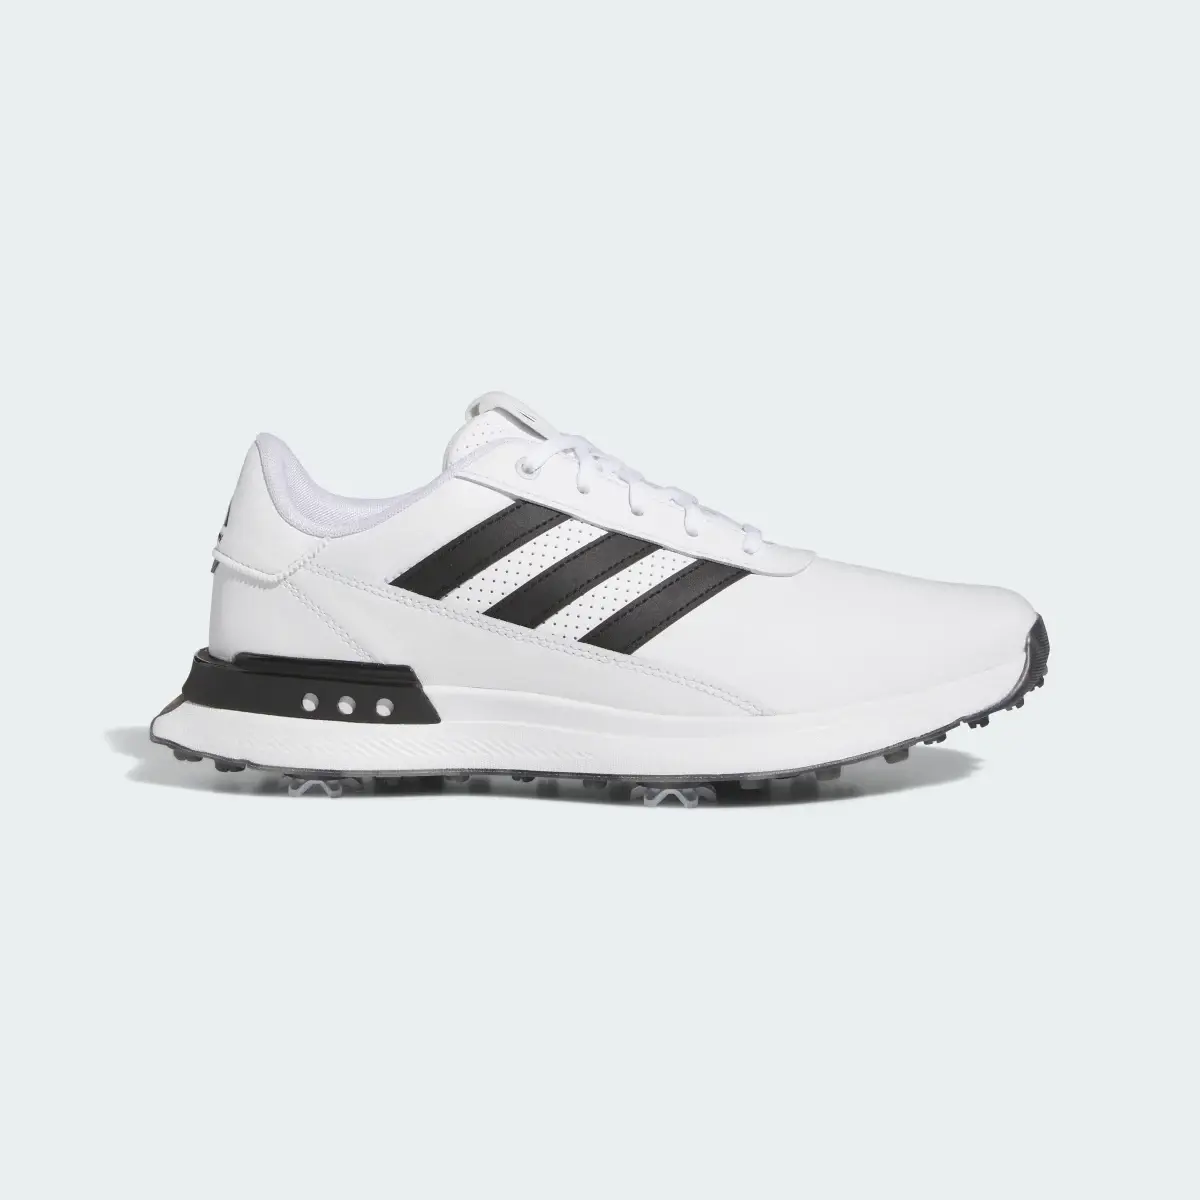 Adidas S2G 24 Golf Shoes. 2